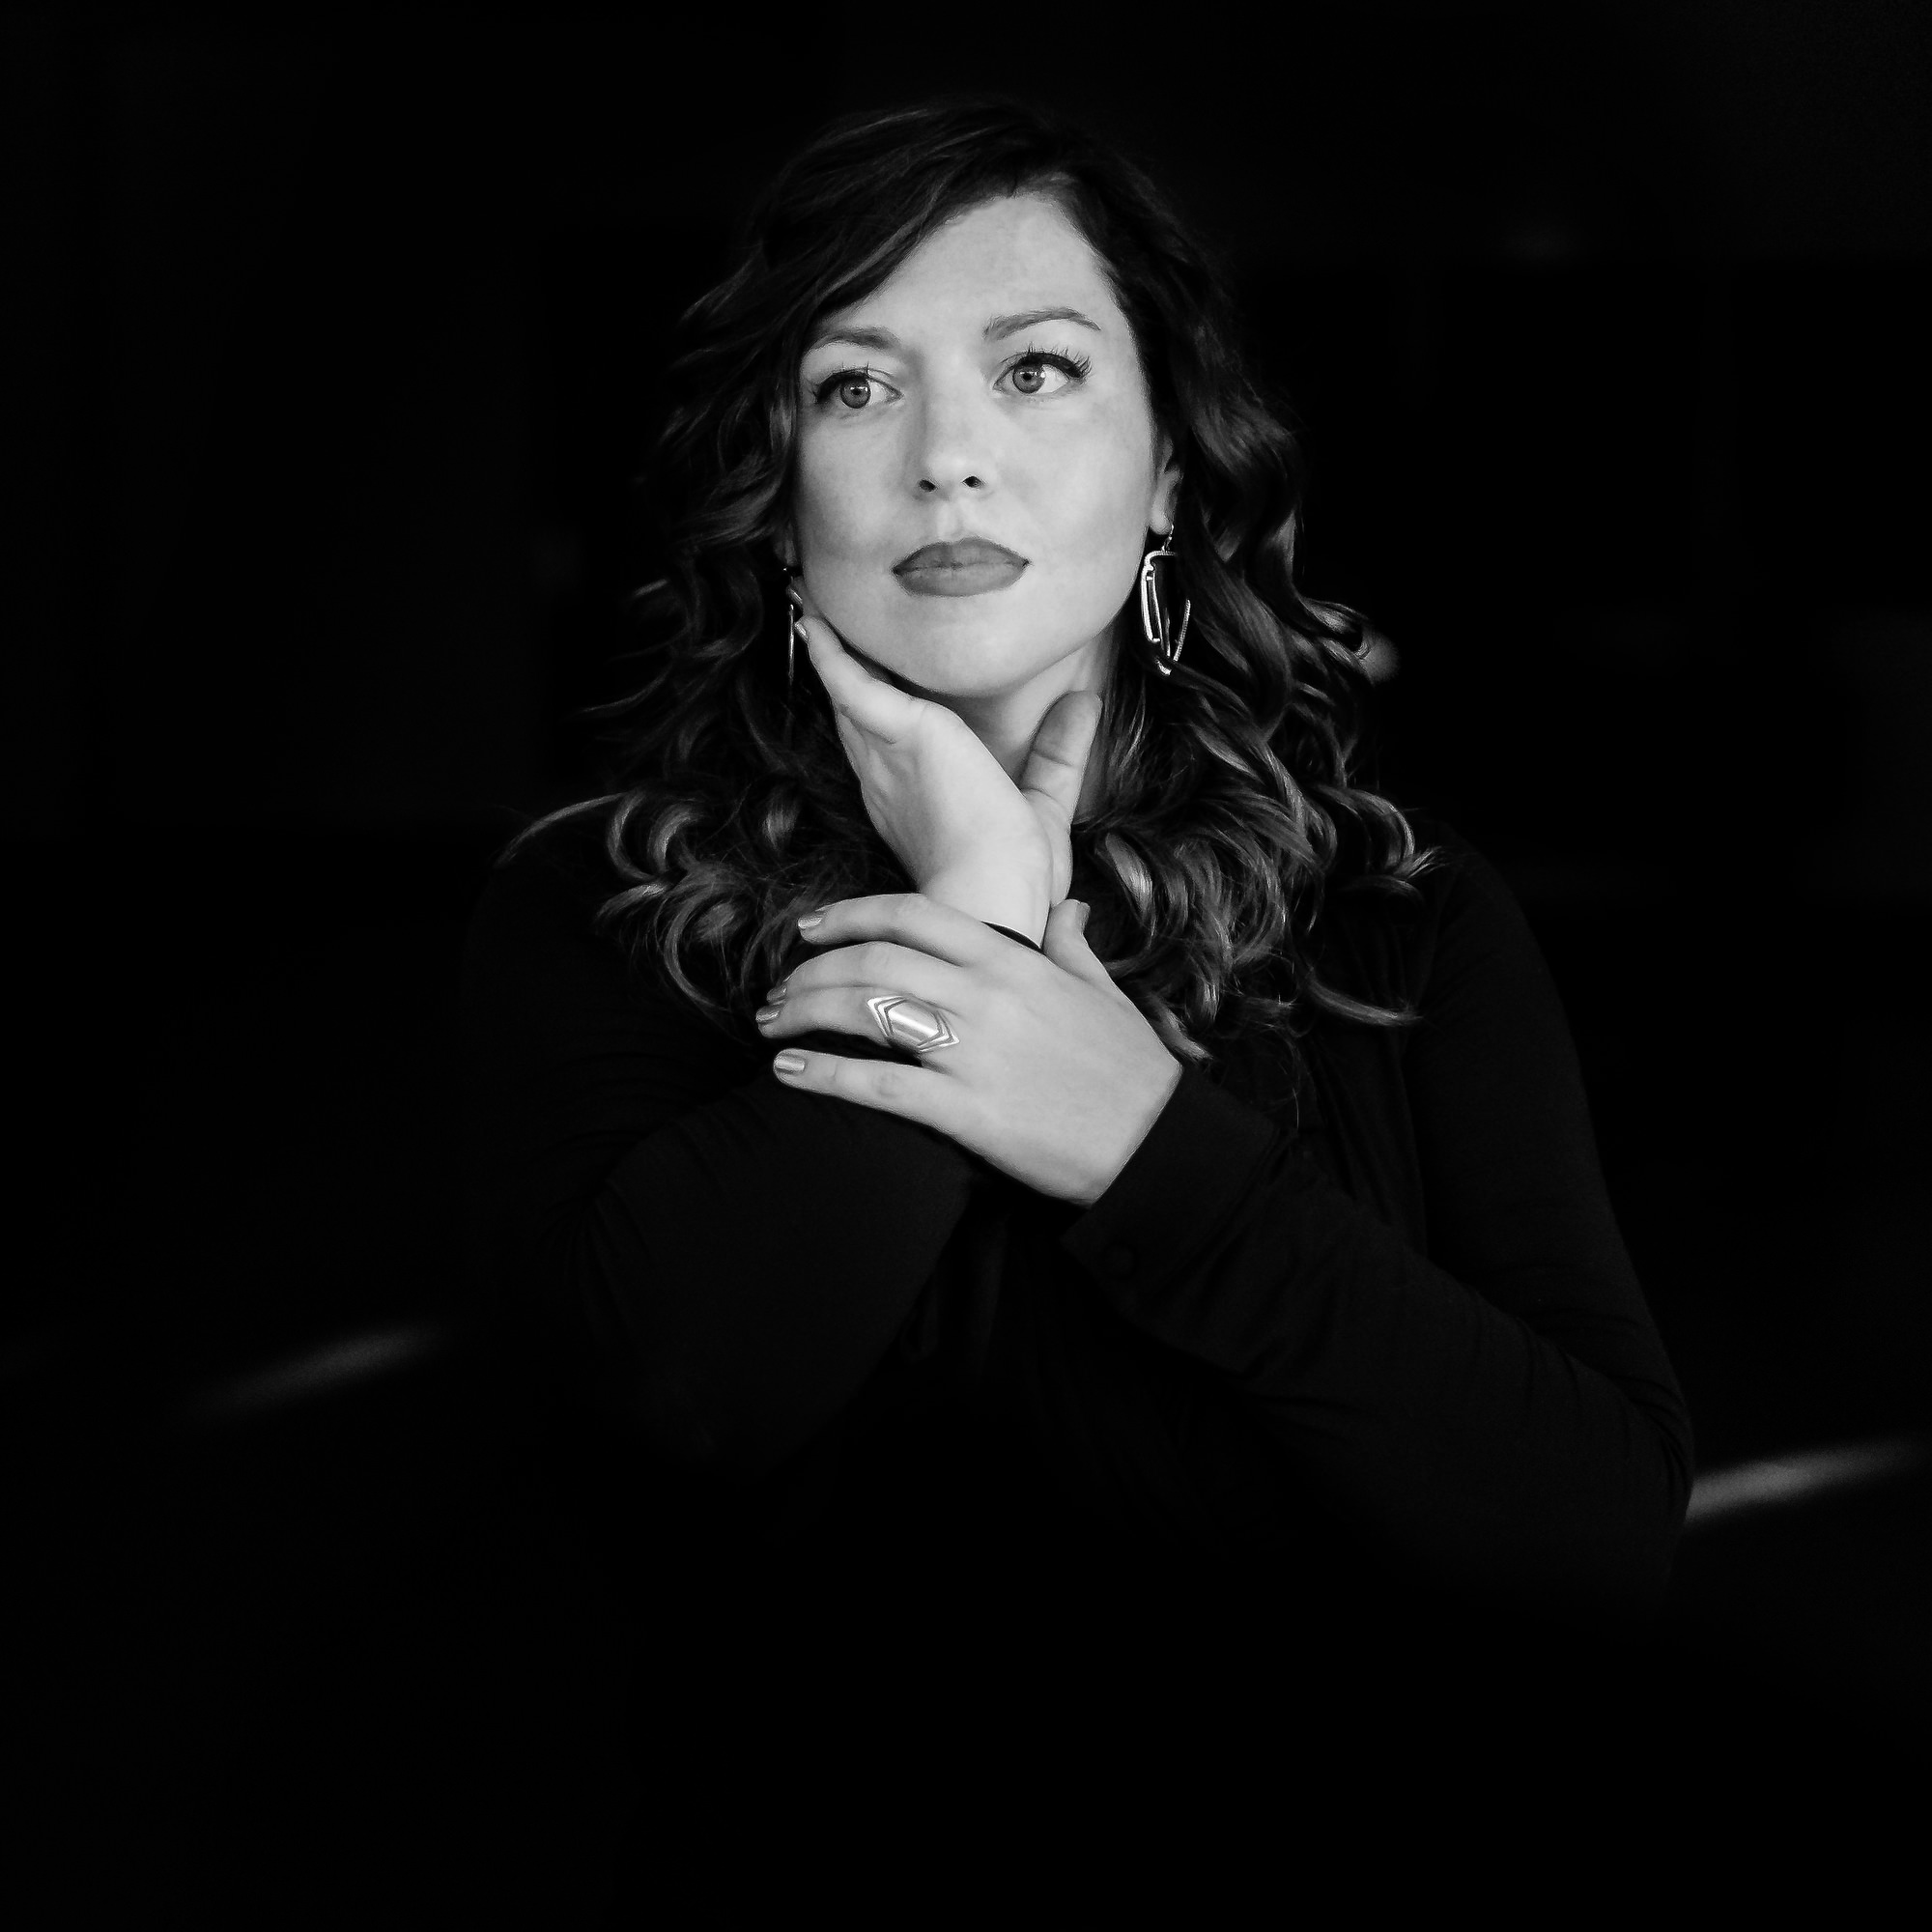 Kathryn Krueger, Hotel Valley Ho, Fearless Conference 2015, Photography Speakers